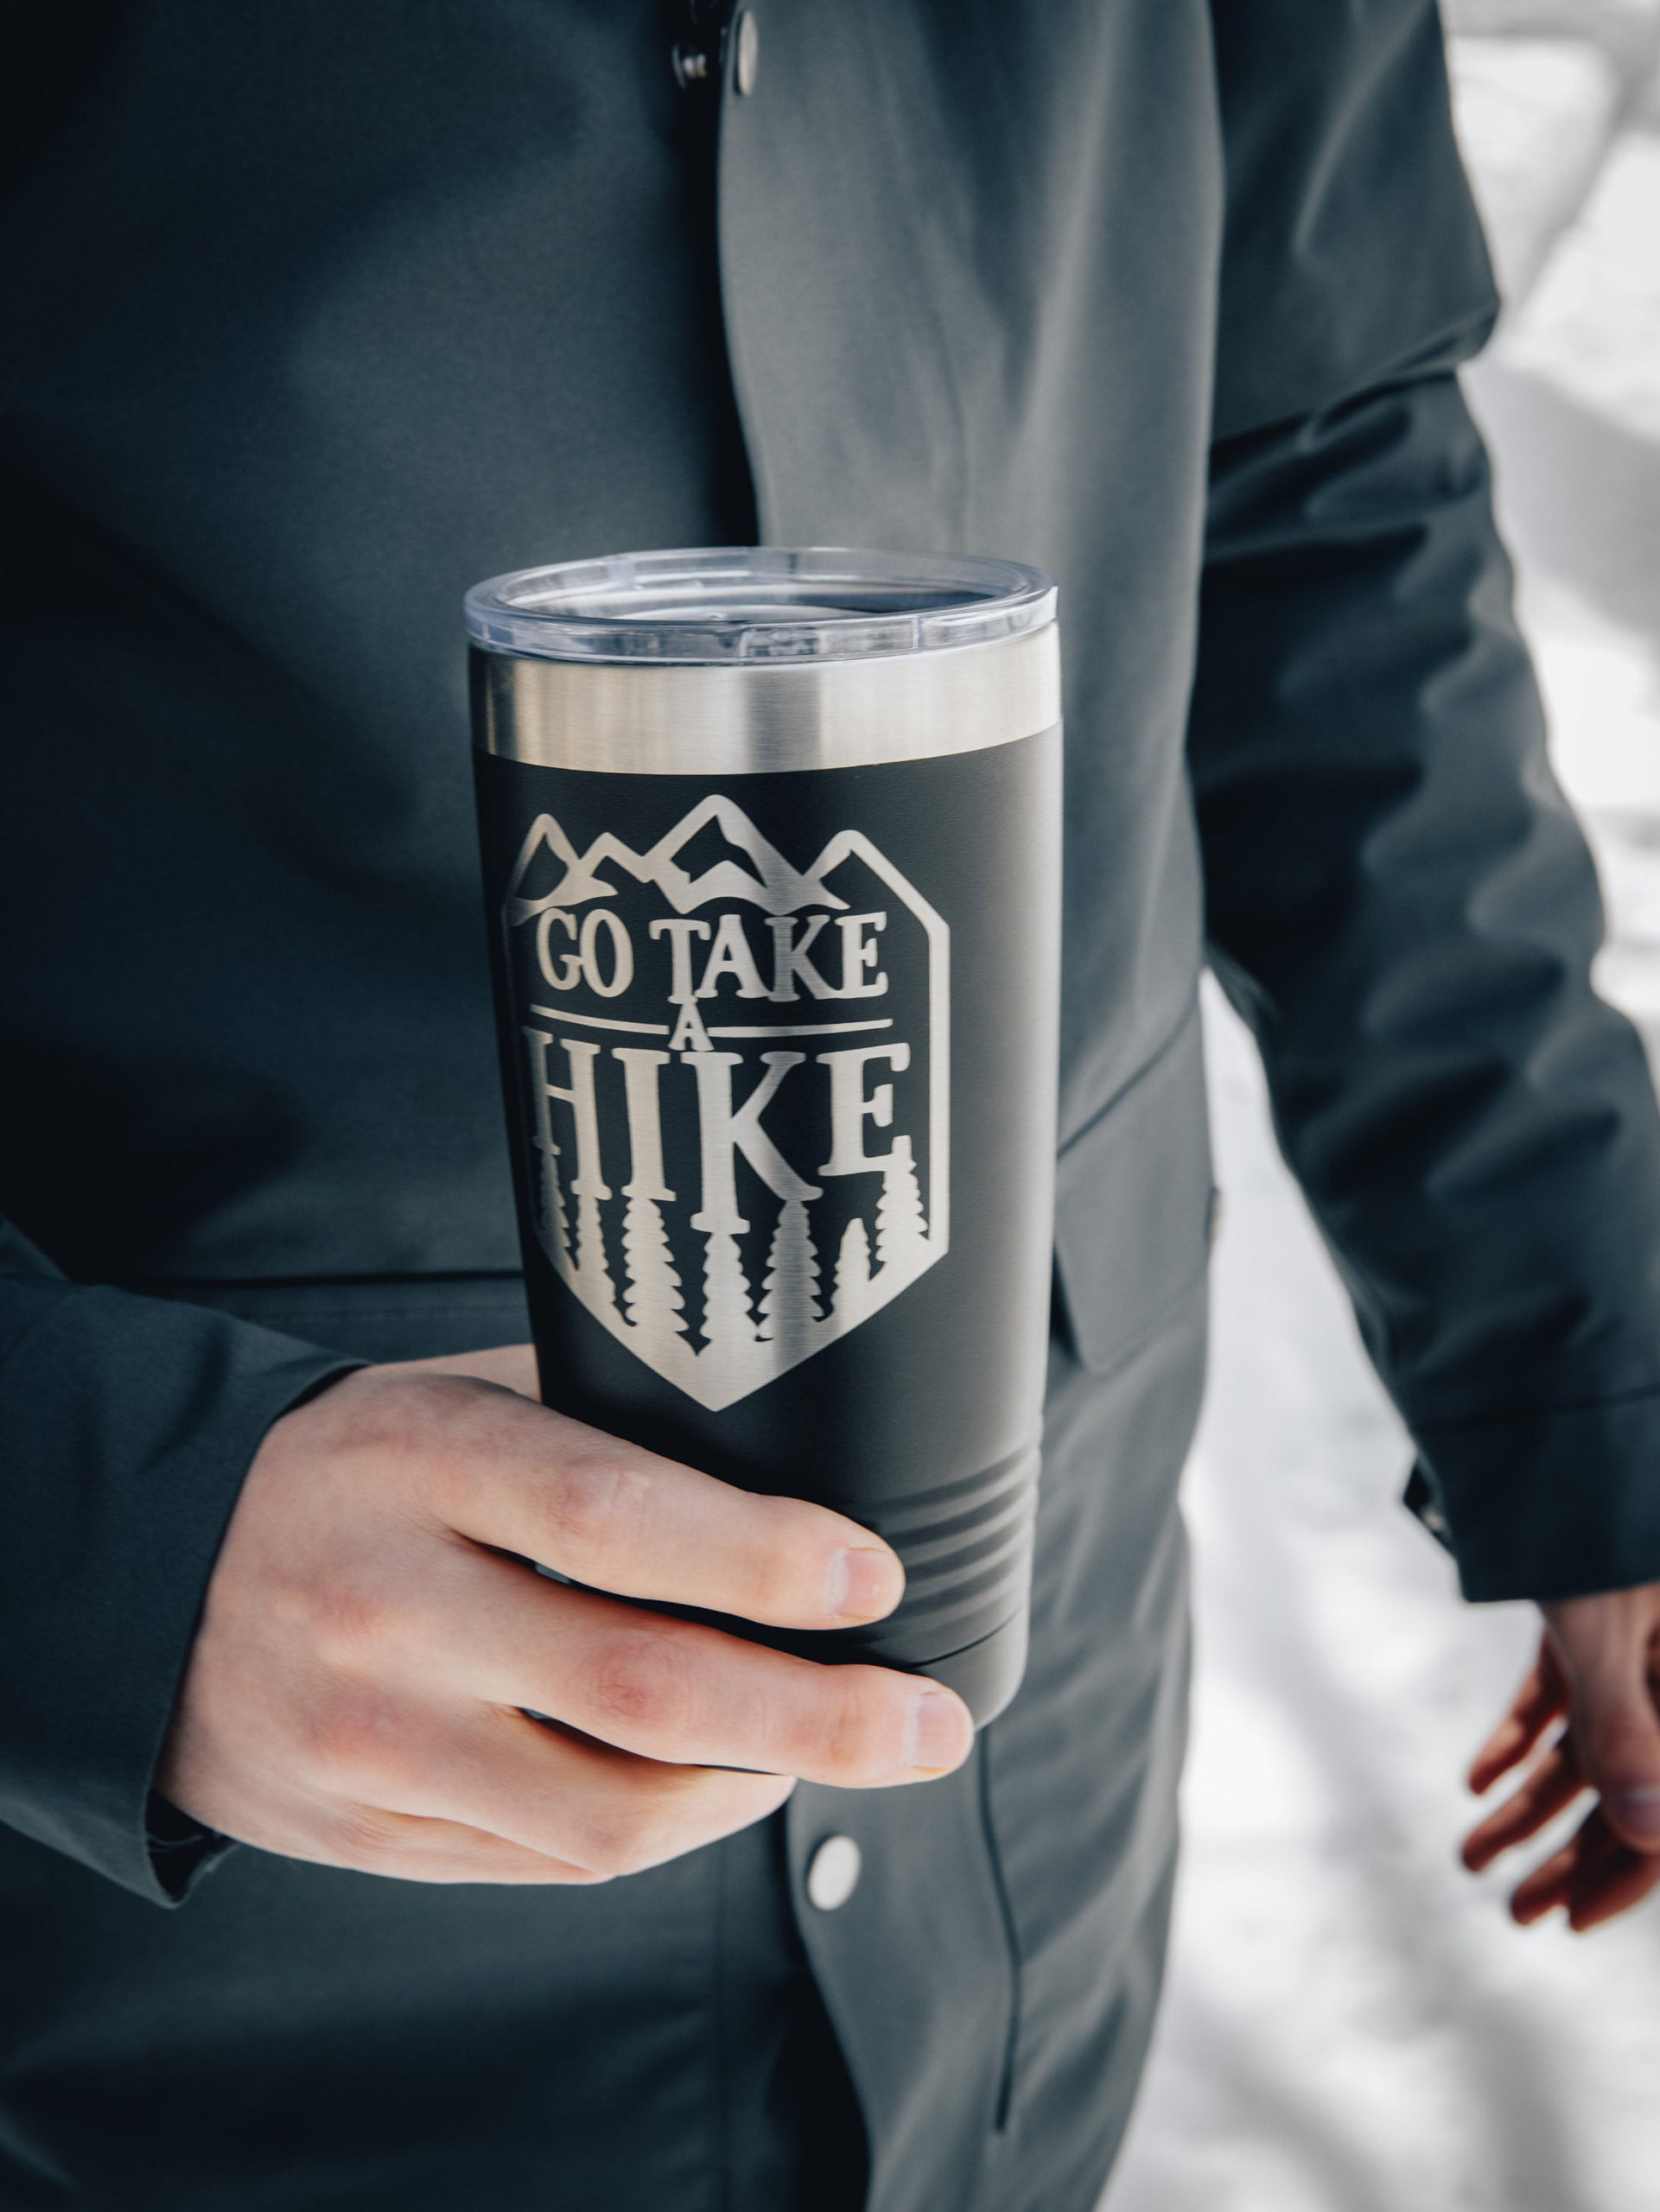 https://3cetching.com/wp-content/uploads/2021/07/go-take-a-hike-engraved-polar-camel-stainless-steel-tumbler-hiking-gift-mug-outdoorsy-gift-cup-60f7616b-scaled.jpg